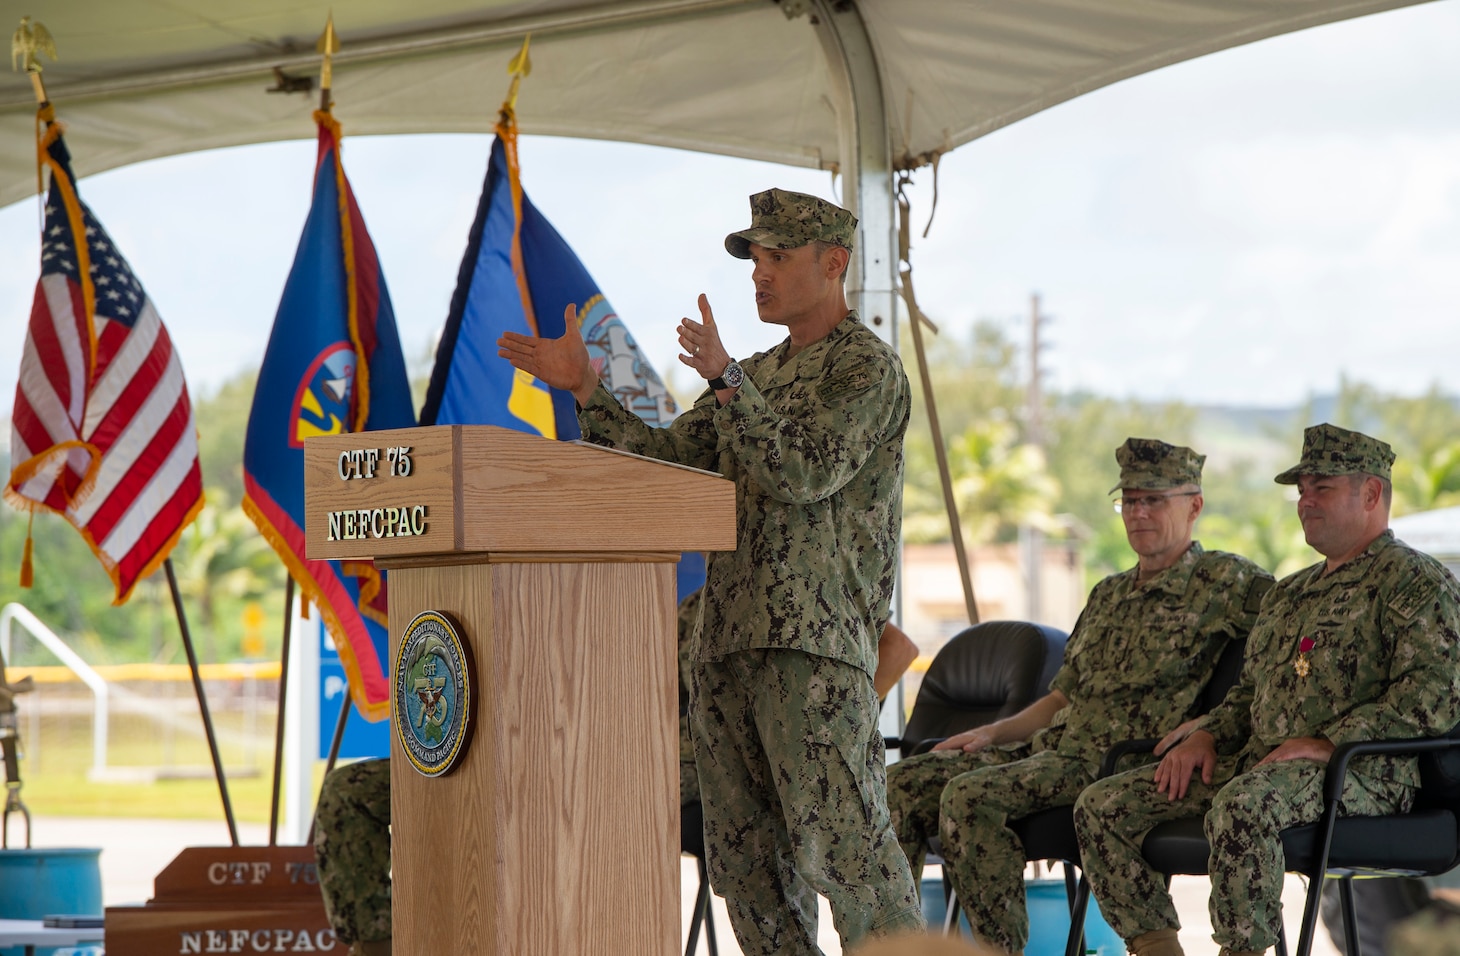 PITI, Guam (June 17, 2022) Commodore, Commander, Task Force 75 Capt. Shaun Lieb, delivers remarks during the change of command ceremony. Capt. Gareth Healy relinquished command as Commodore, CTF 75 to Lieb. CTF 75 provides expeditionary combat capabilities in the U.S. Navy's 7th Fleet area of operations and is capable of providing the fleet with diverse expeditionary warfighting capabilities that are combat-ready and able to deploy anywhere in U.S. 7th Fleet in response to any contingency. The Navy's expeditionary forces exist first and foremost to support the fleet's warfighting operations and are the Navy's sea-to-shore interface. (U.S. Navy photo by Mass Communication Specialist 1st Class Billy Ho)